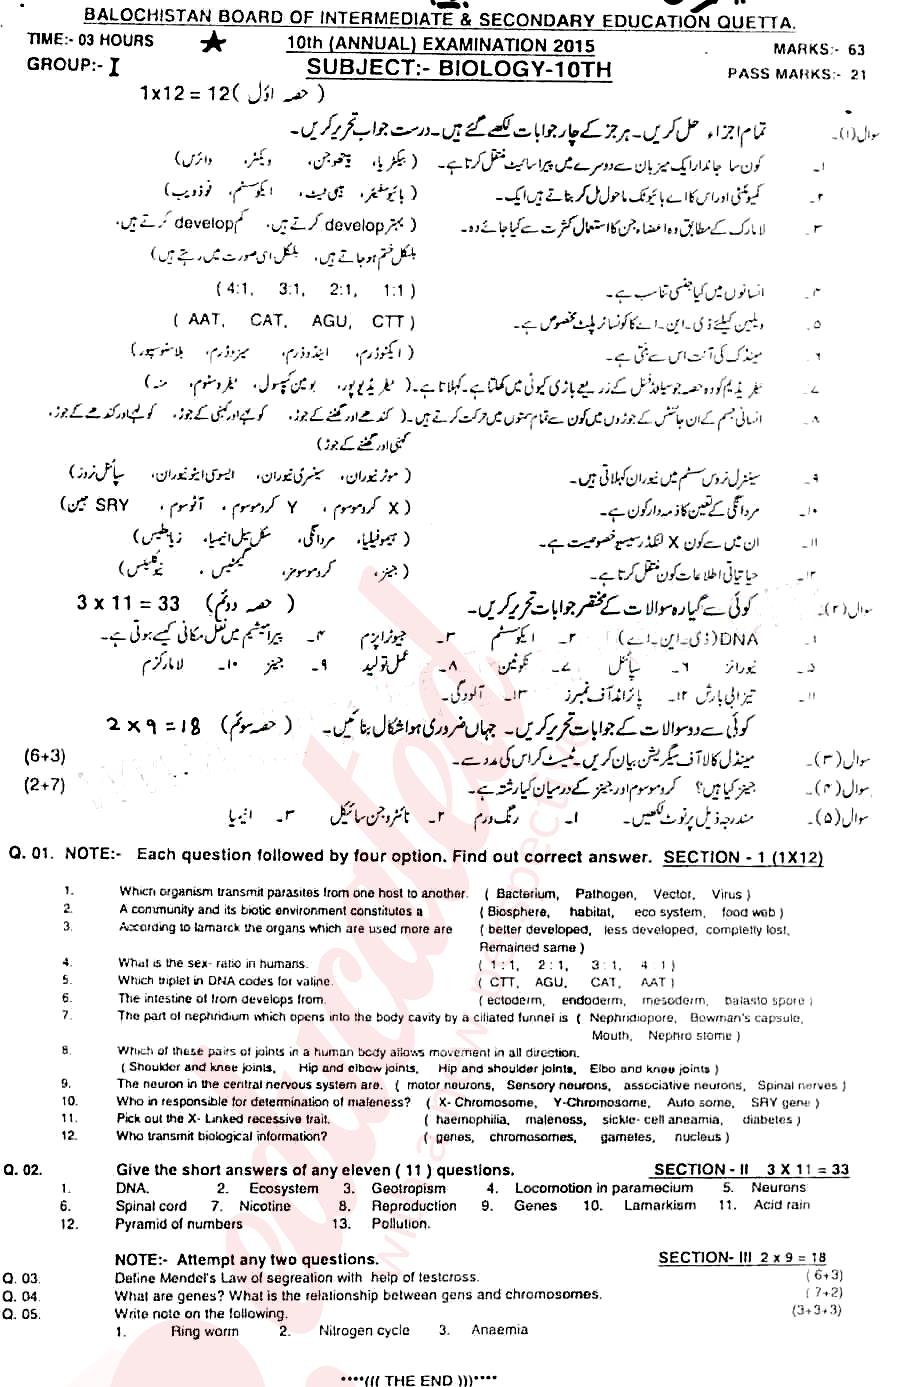 Biology 10th class Past Paper Group 1 BISE Quetta 2015